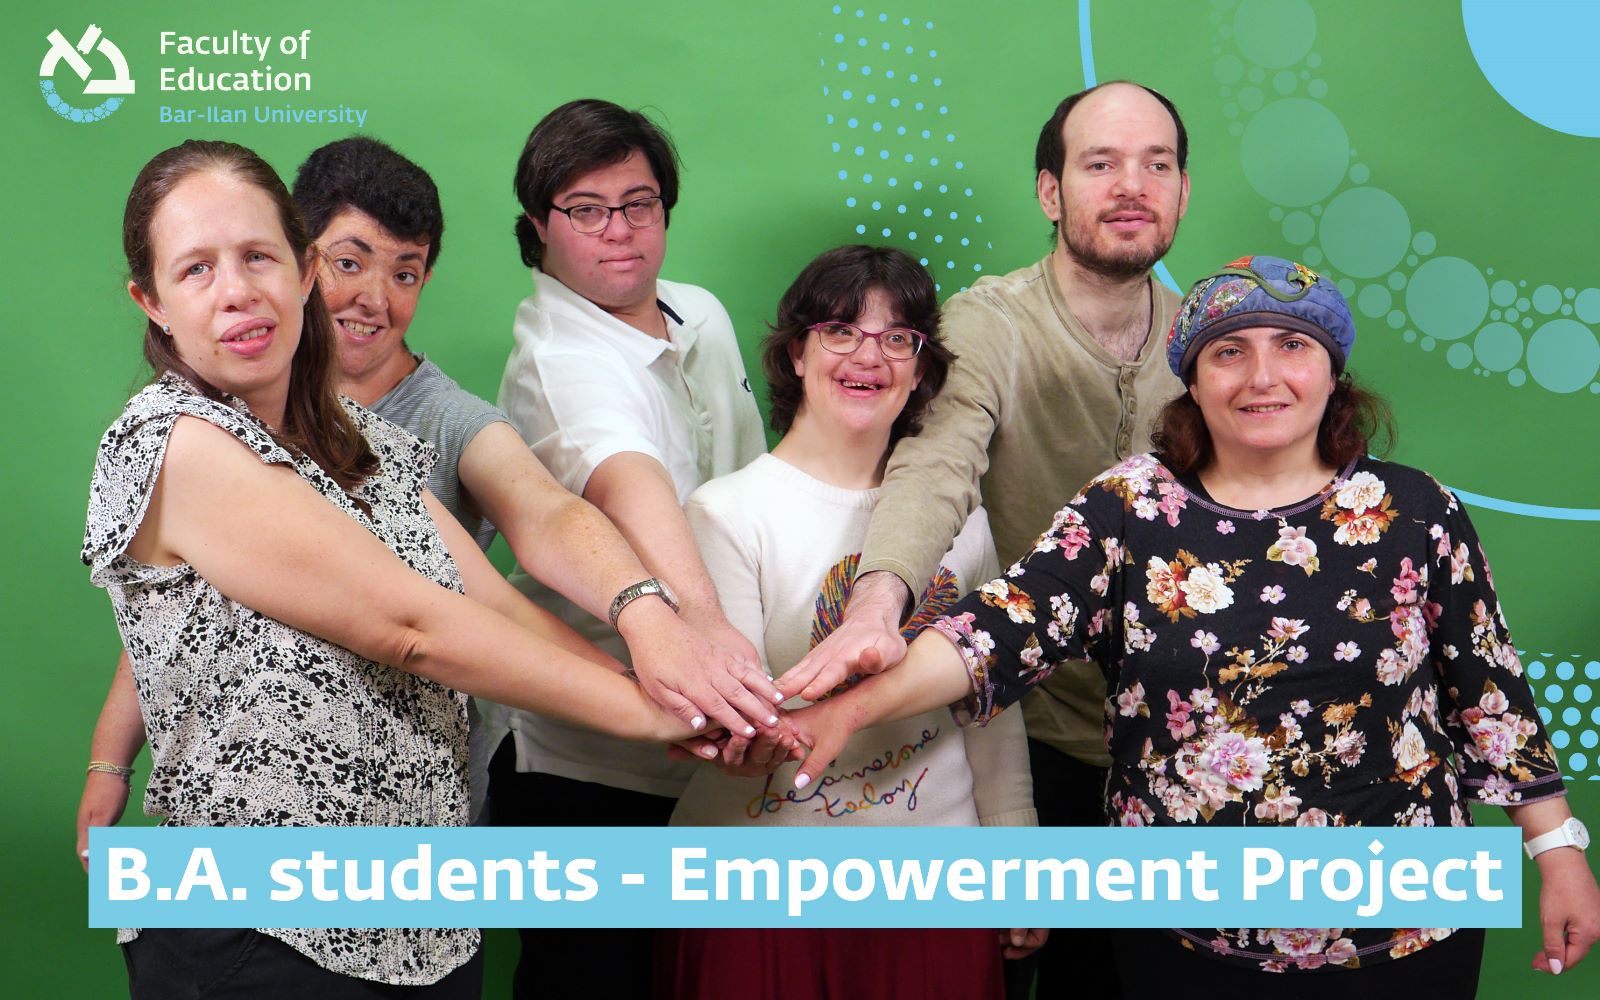 BA students empowerment project